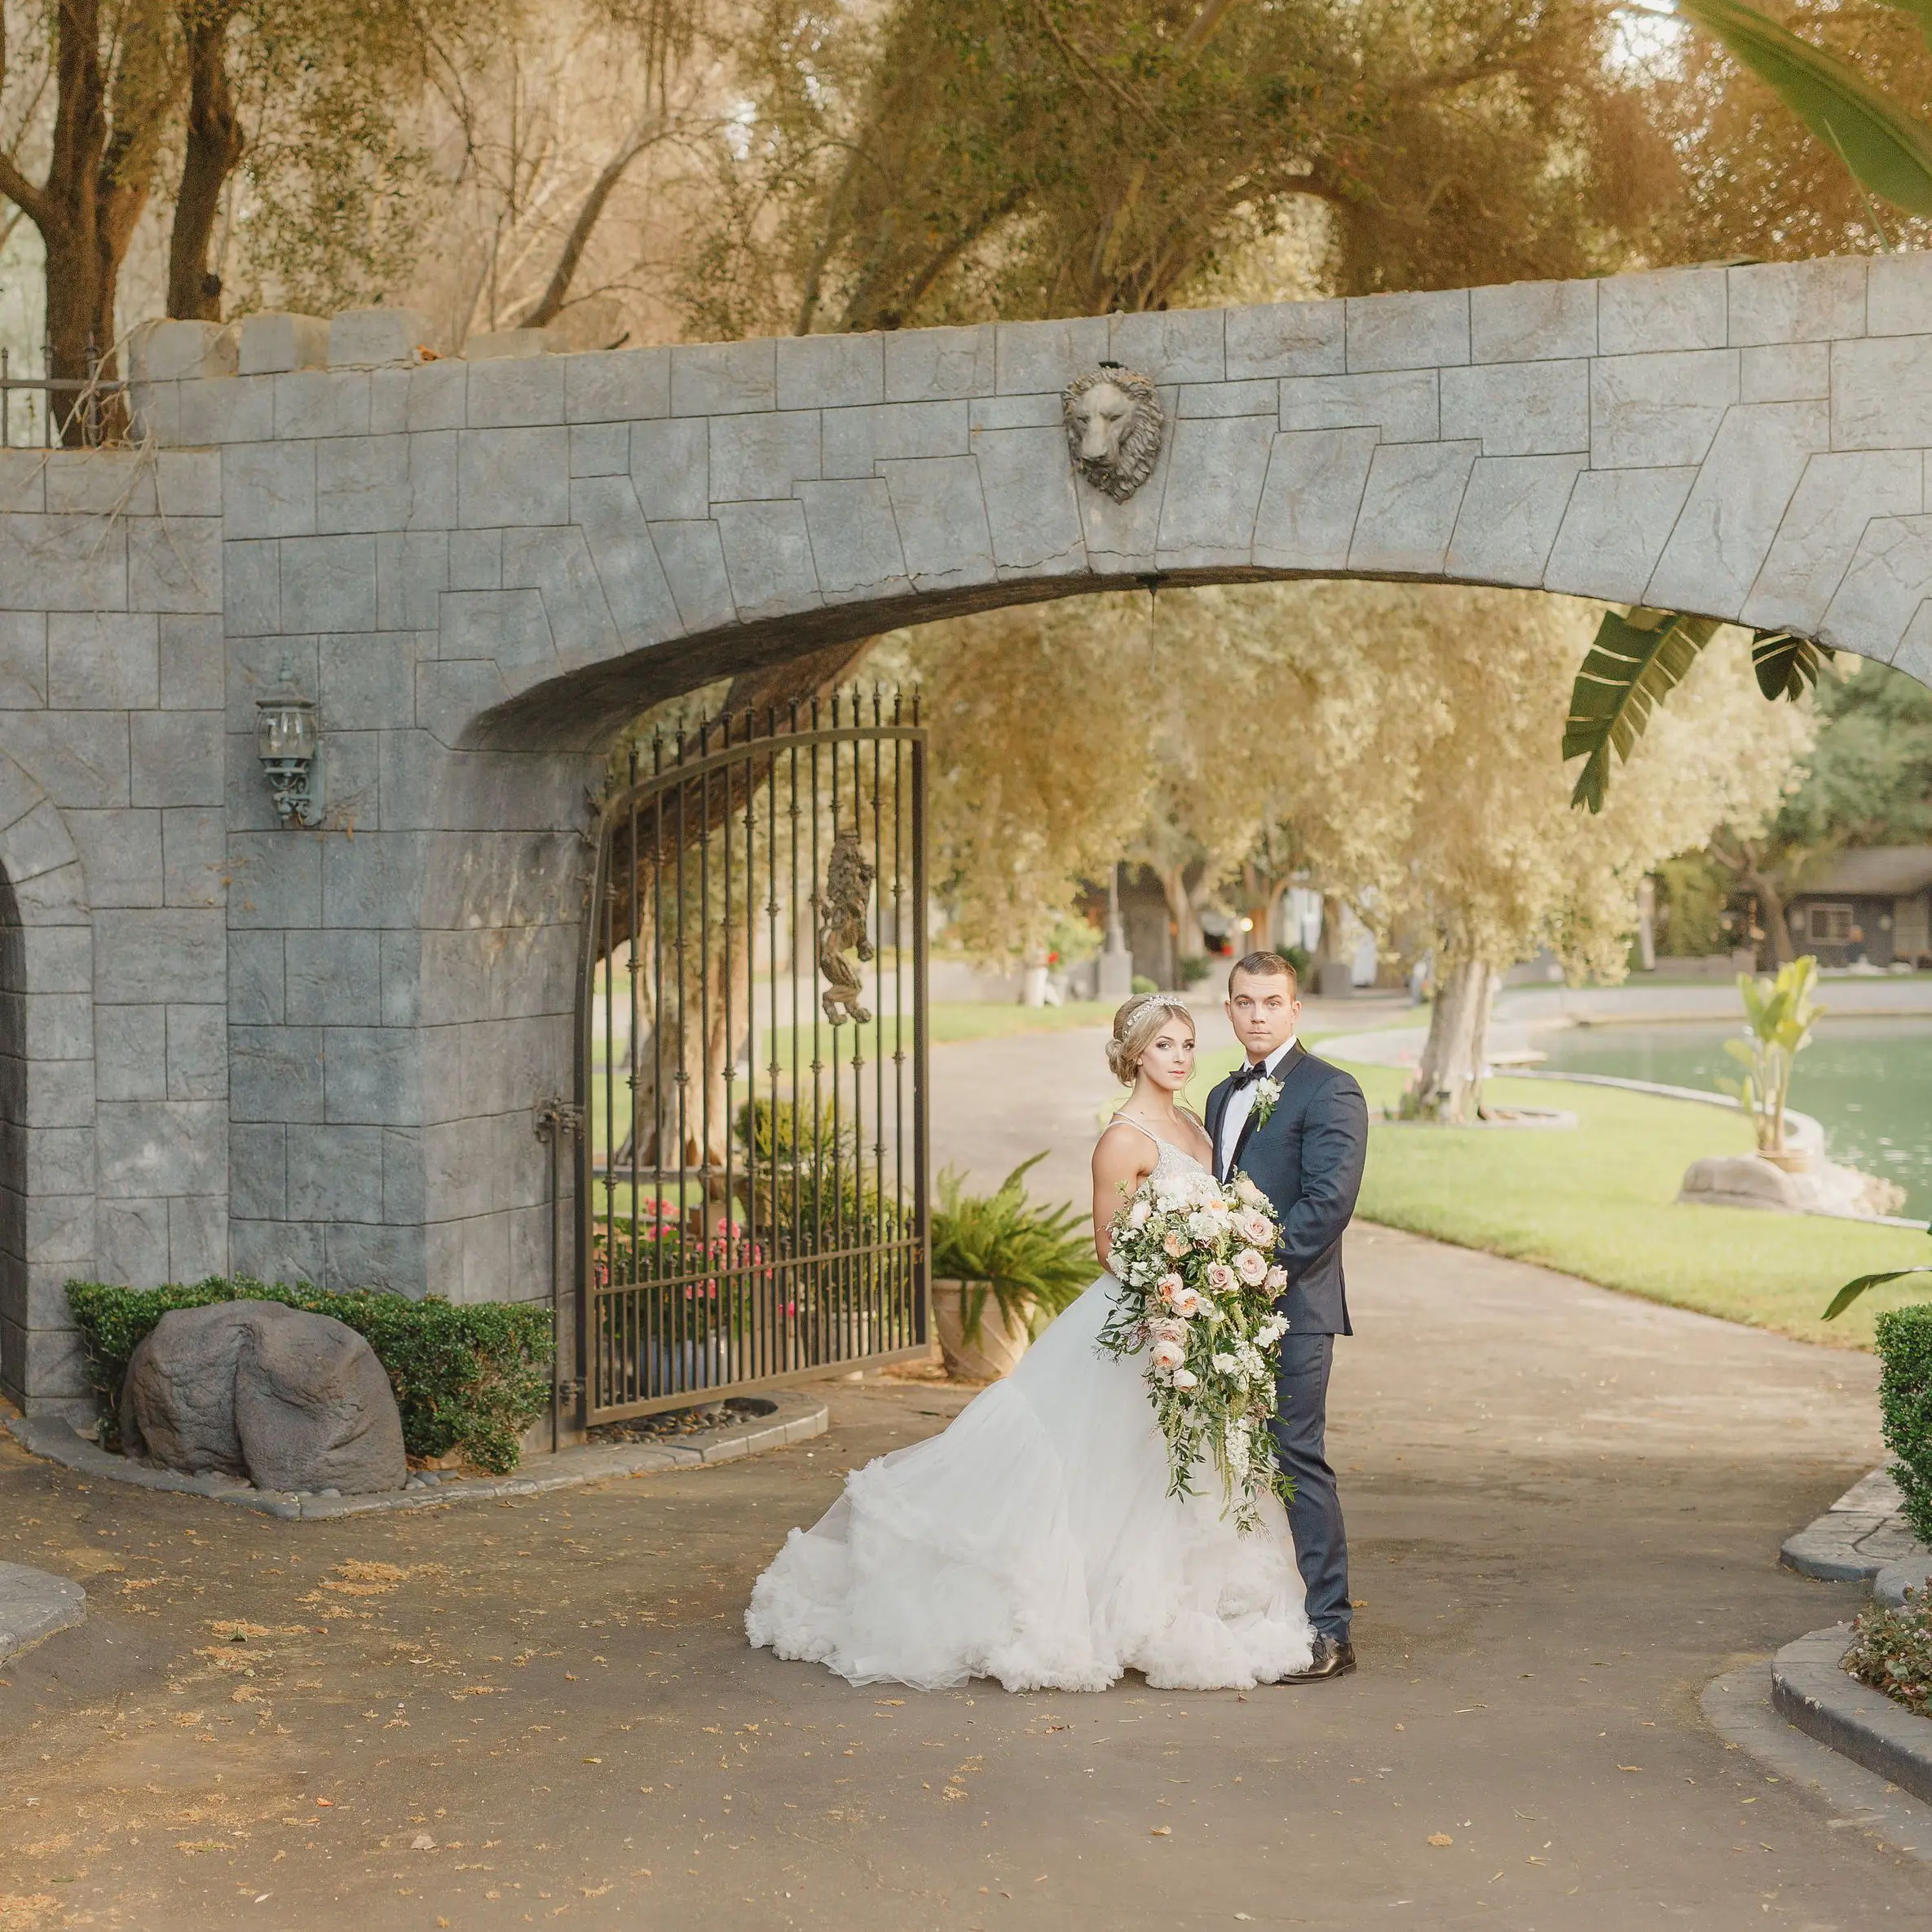 The most magical wedding venue in Southern California. Th